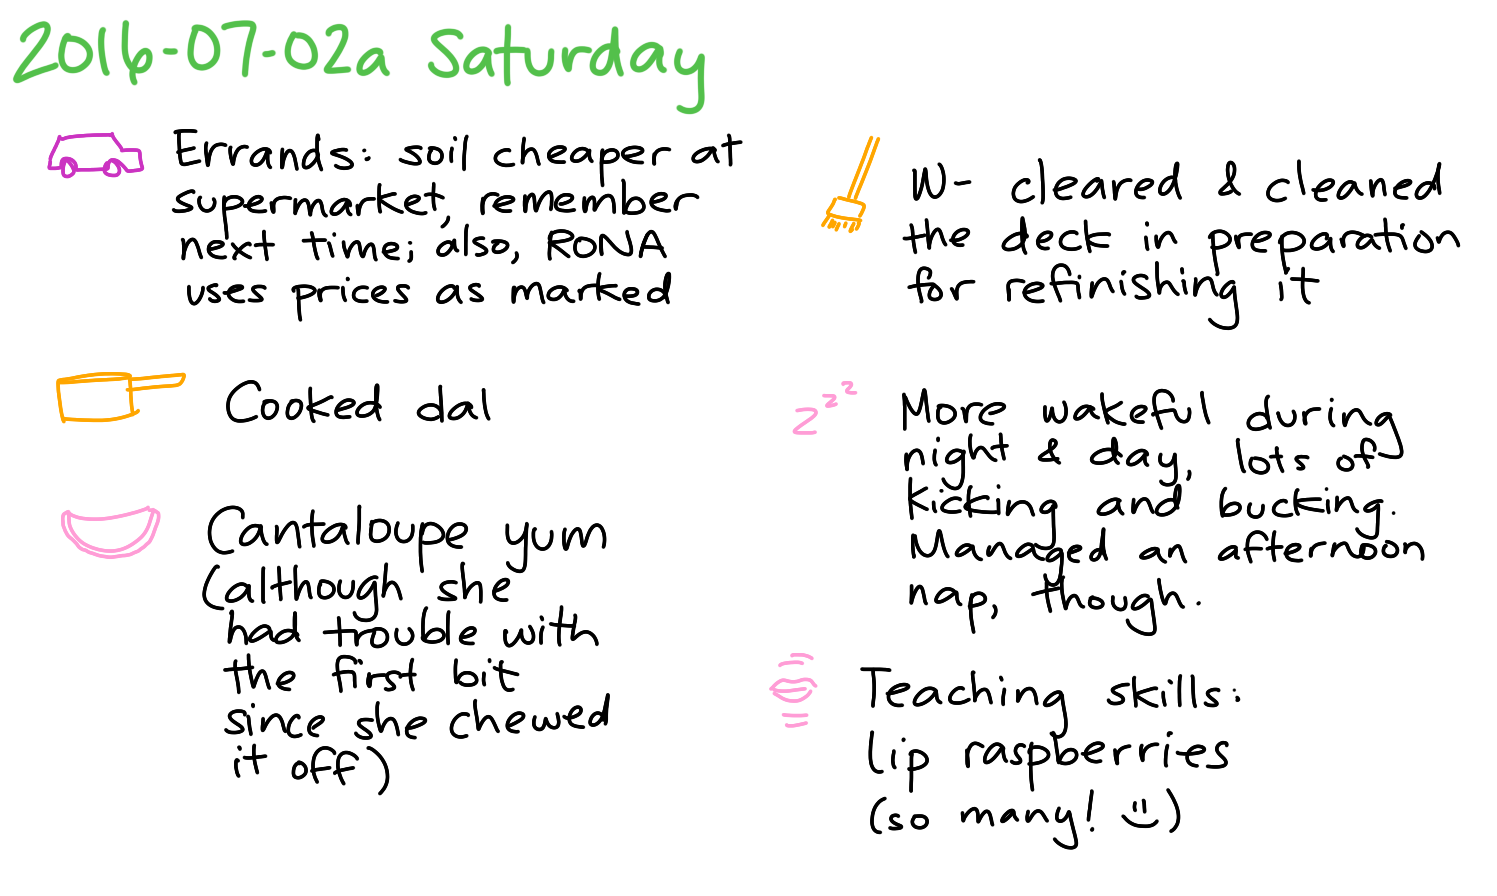 2016-07-02a Saturday -- index card #journal.png